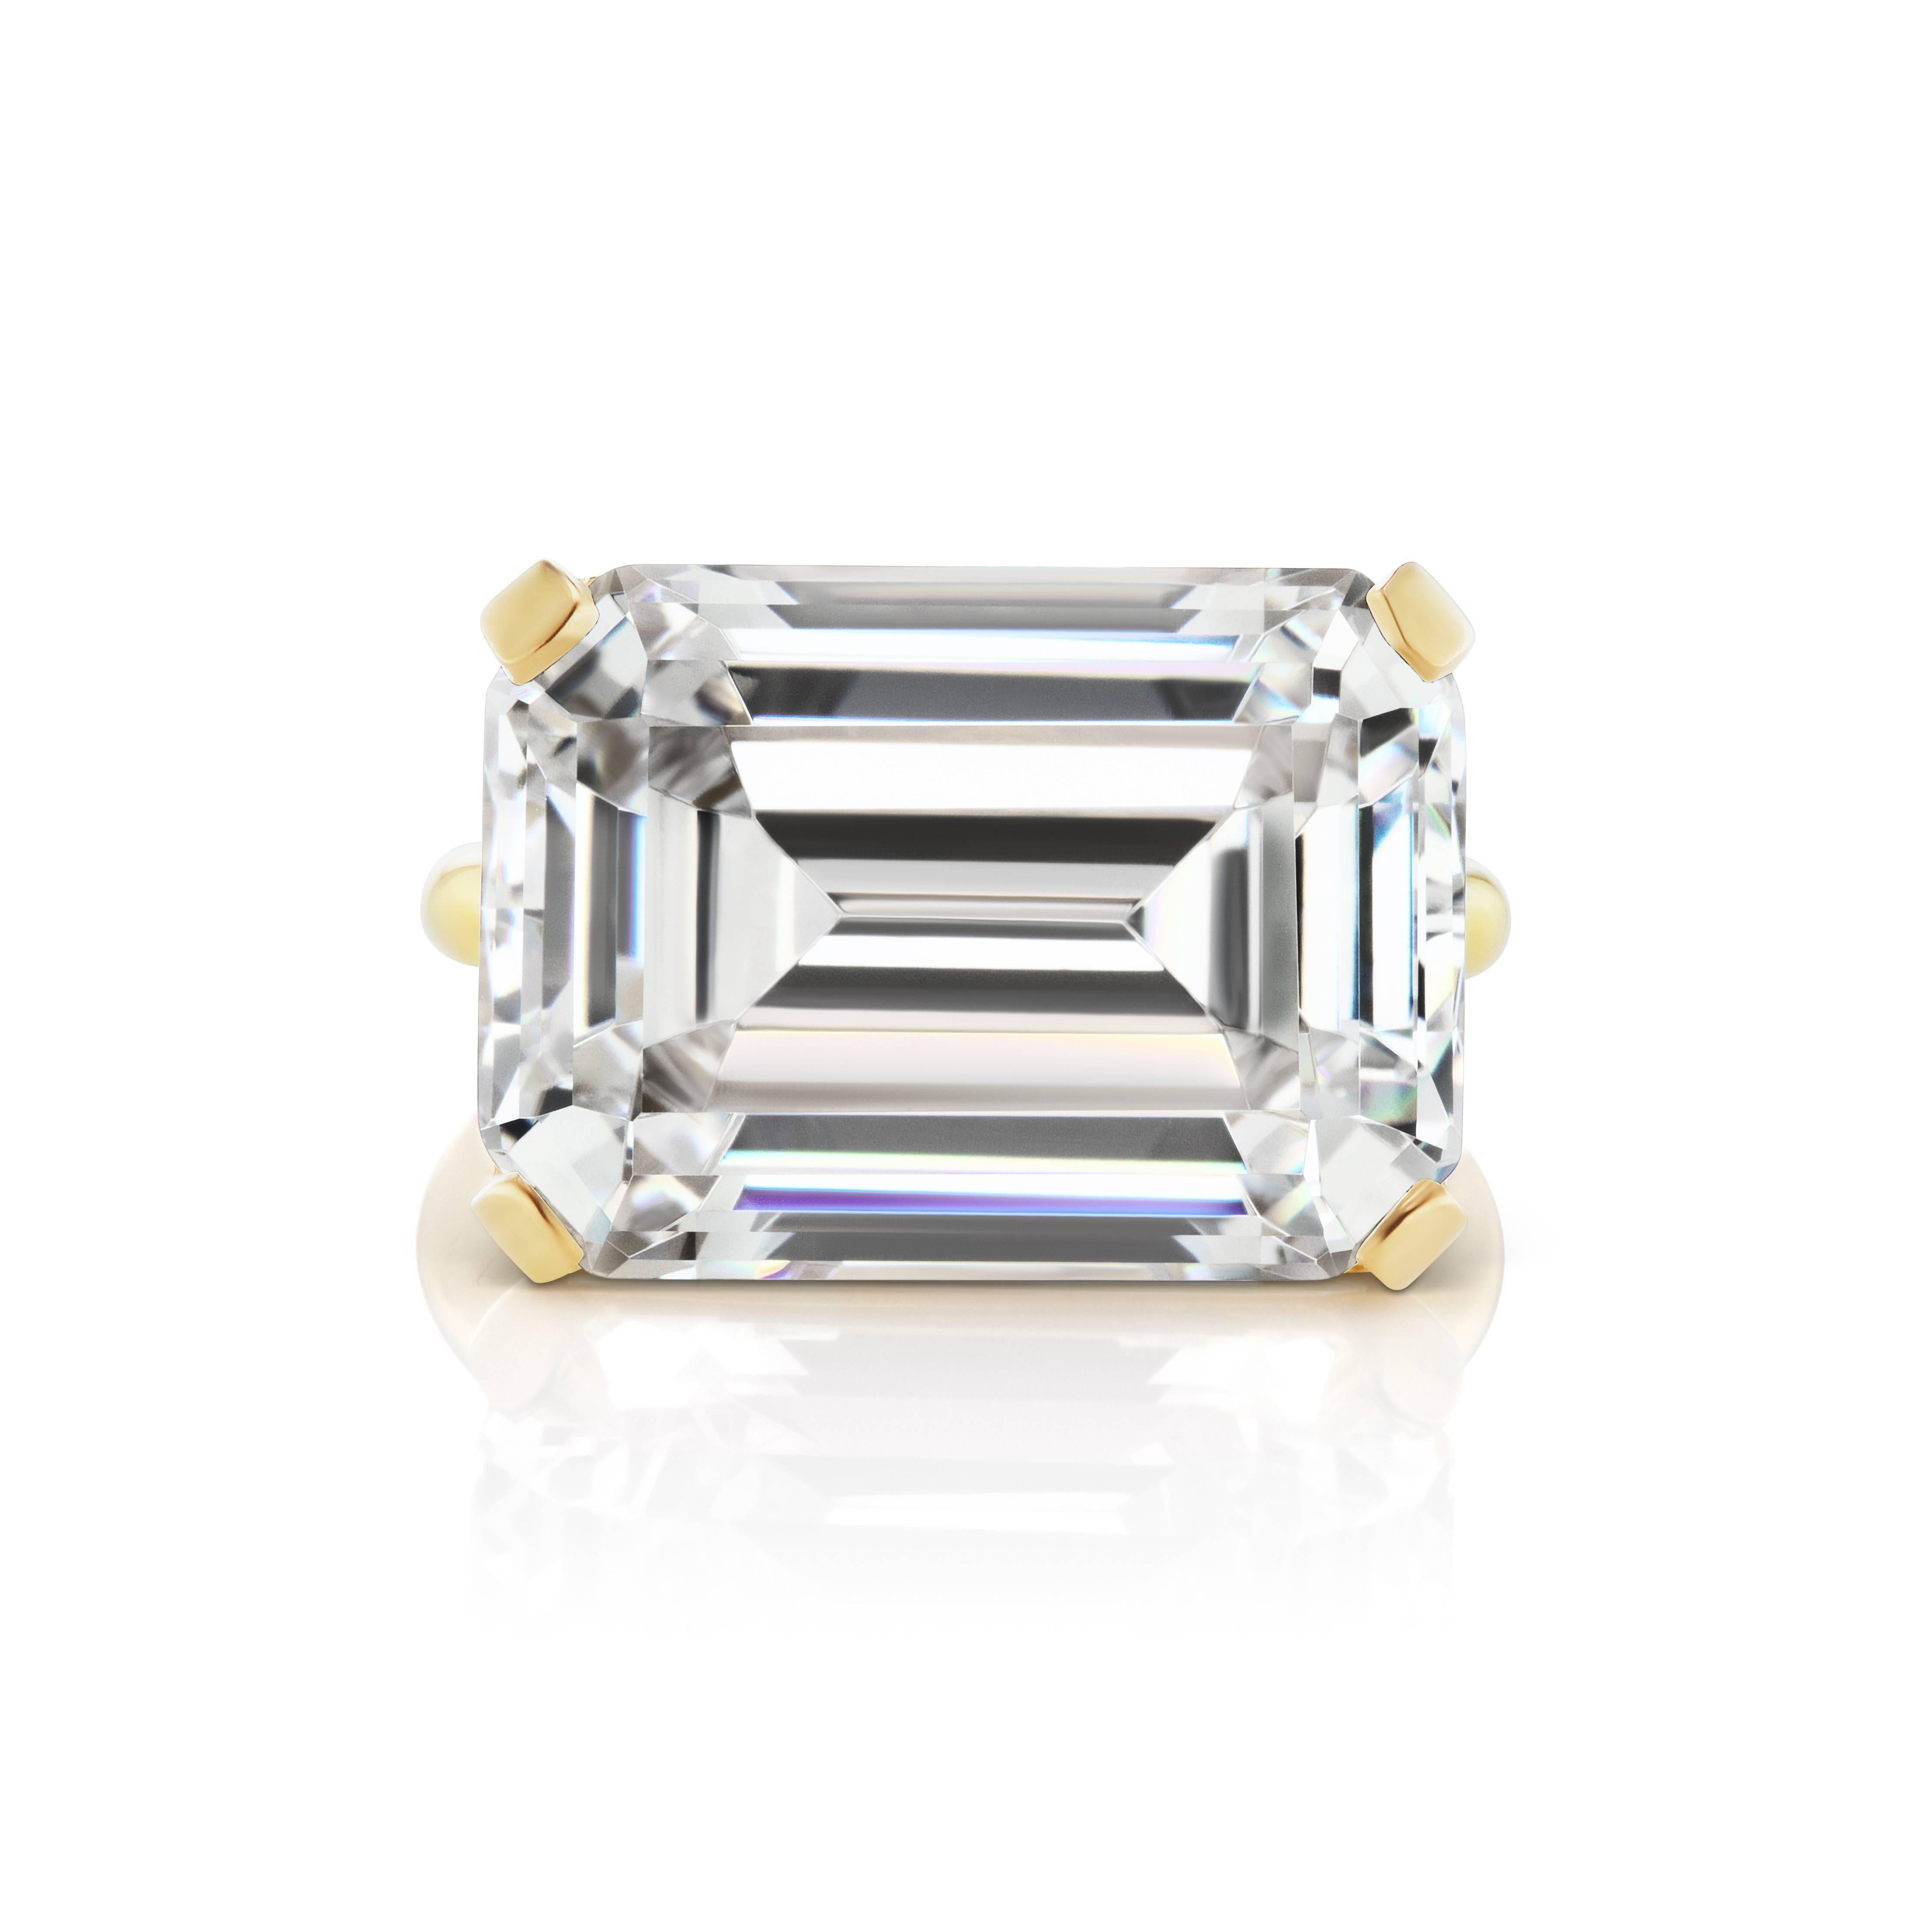 Magnificent  Costume Jewelry Faux Emerald Cut 15 Carat Diamond  Contemporary Modern Vermeil Setting Ring. This Newly Designed Ring Measure 3/4 inch across, half an inch wide and sits 1/4 inch on the finger. Chic Bold Impressive.  